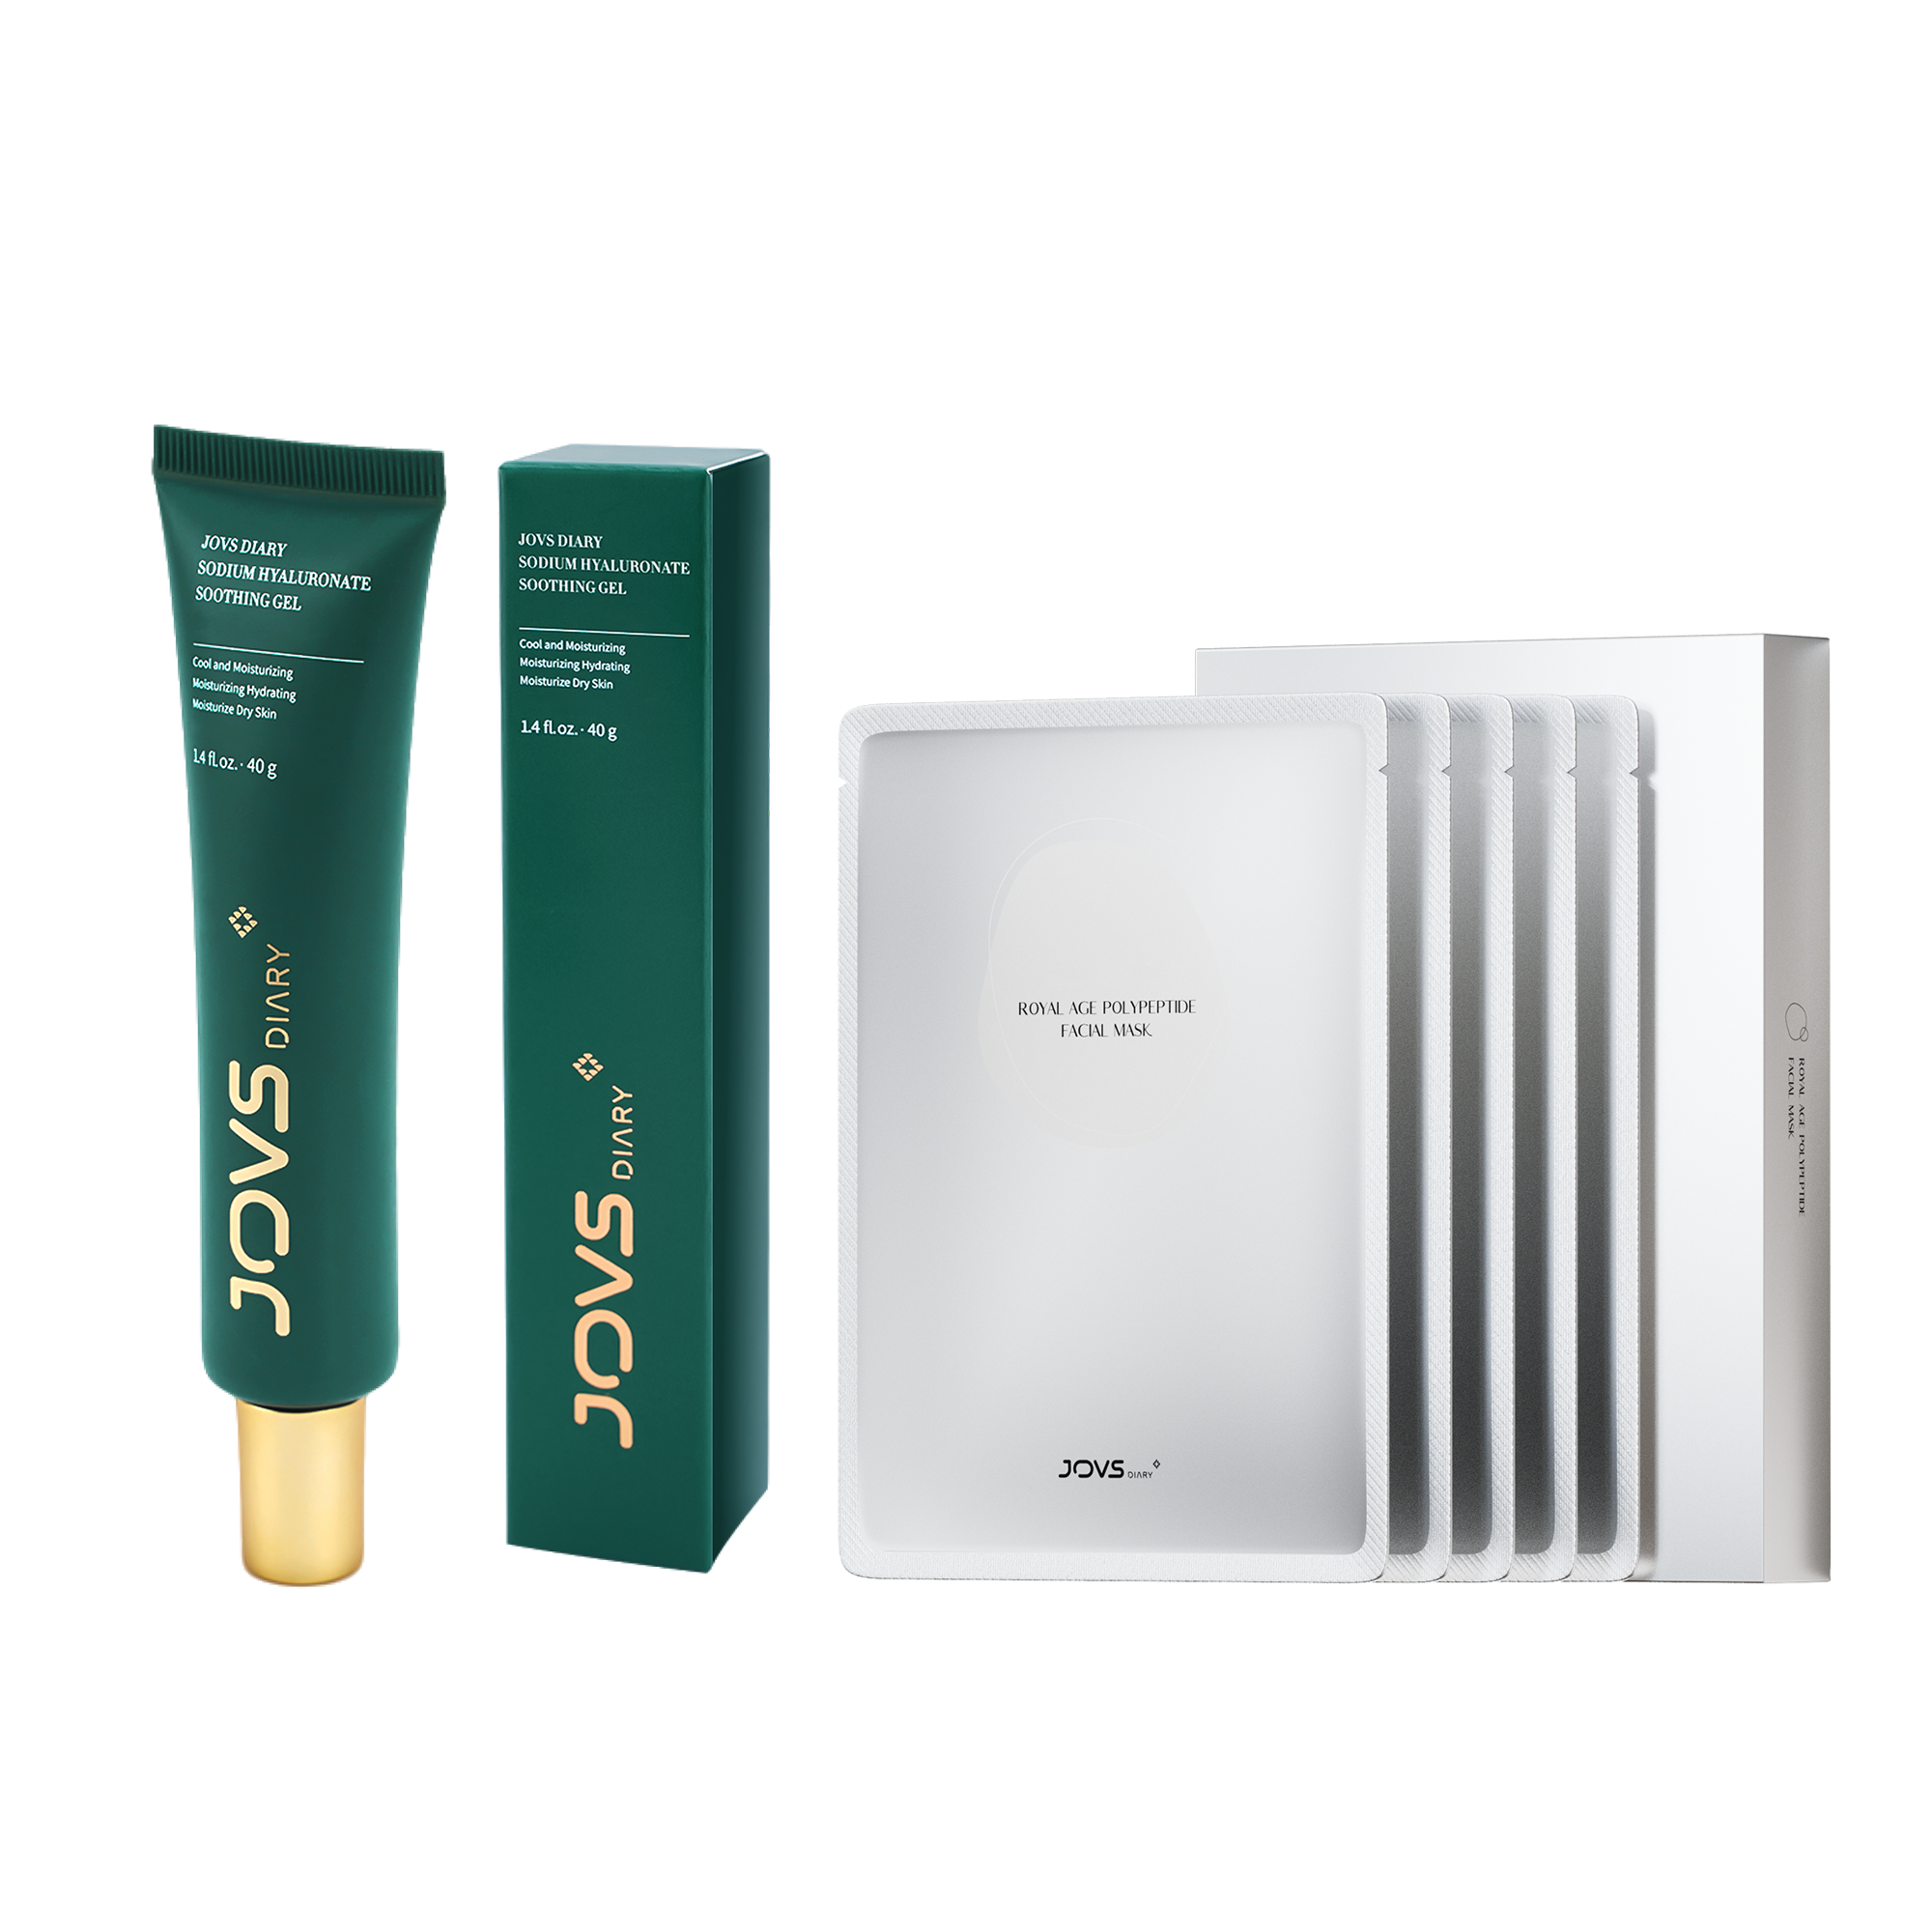 JOVS DIARY Moisturizing and Nourishing Skin Care Kits with Soothing Gel and Polypeptide Facial Mask.